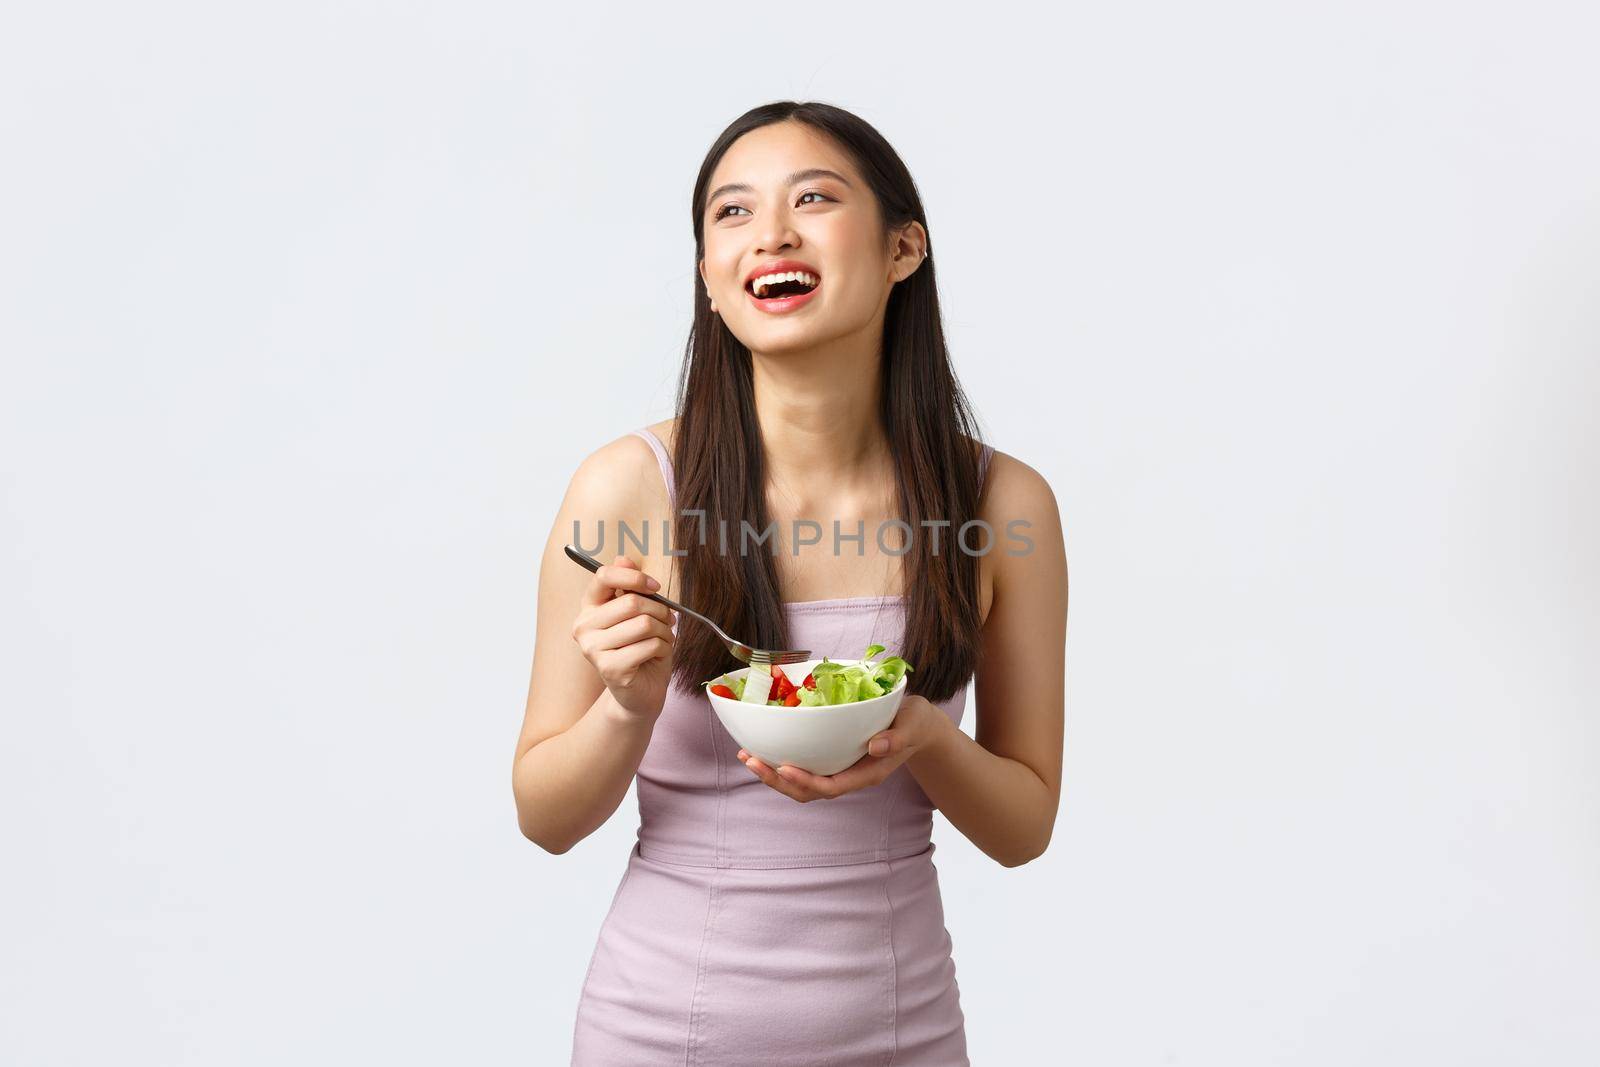 Healthy lifestyle, leisure and people emotions concept. Gorgeous happy asian girl smiling and laughing while eating salad, staying fit for summer, wearing evening dress, white background.